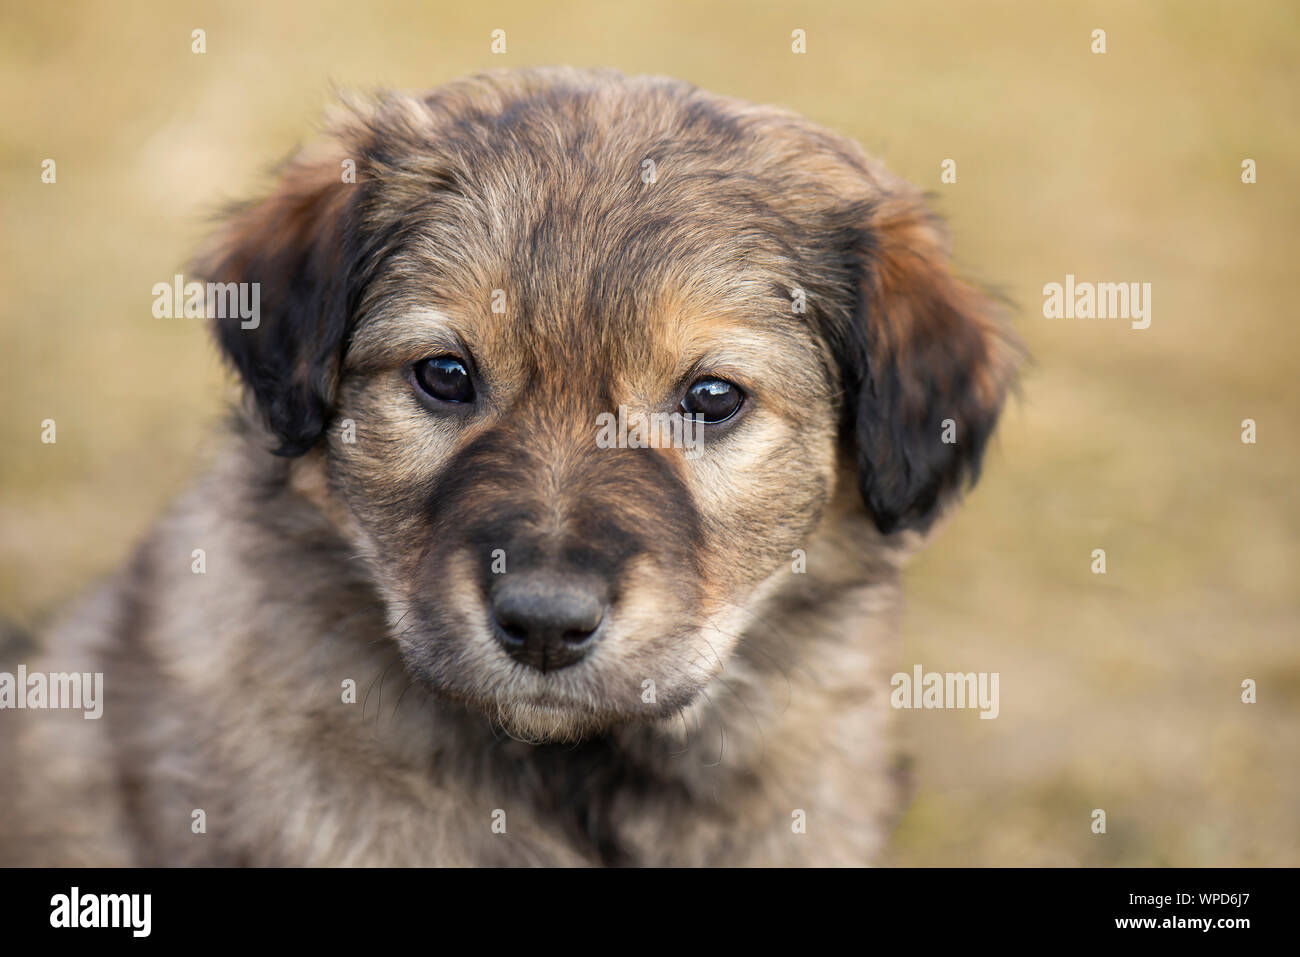 Cute little stray mongrel puppy. Portrait of little brown homeless puppy dog. Stock Photo